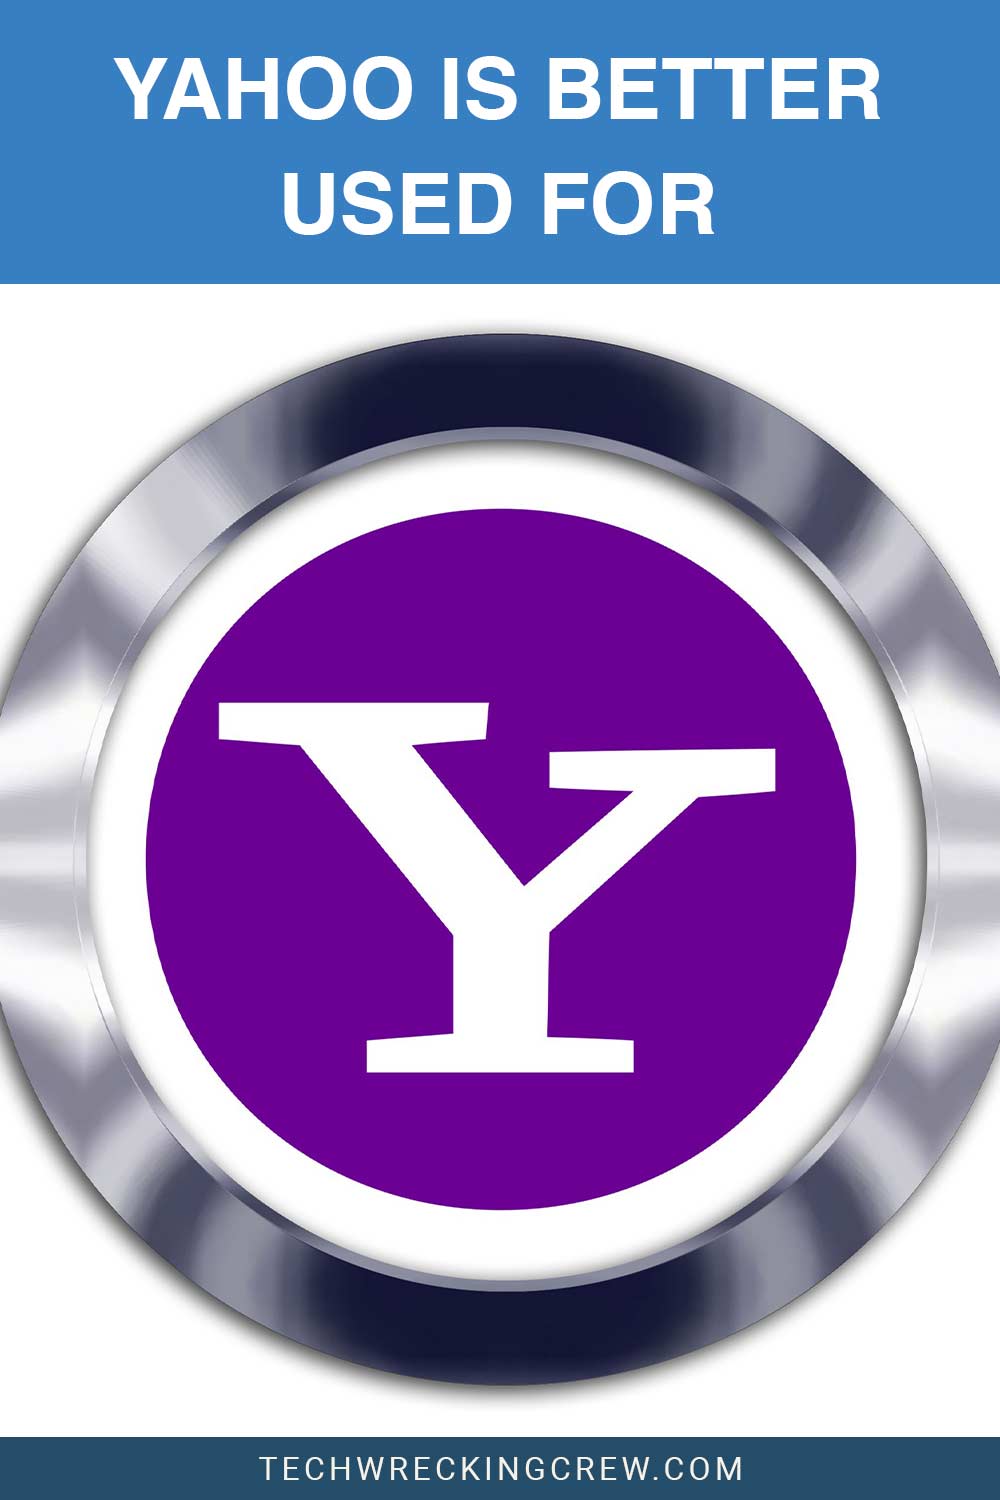 Yahoo is better used for